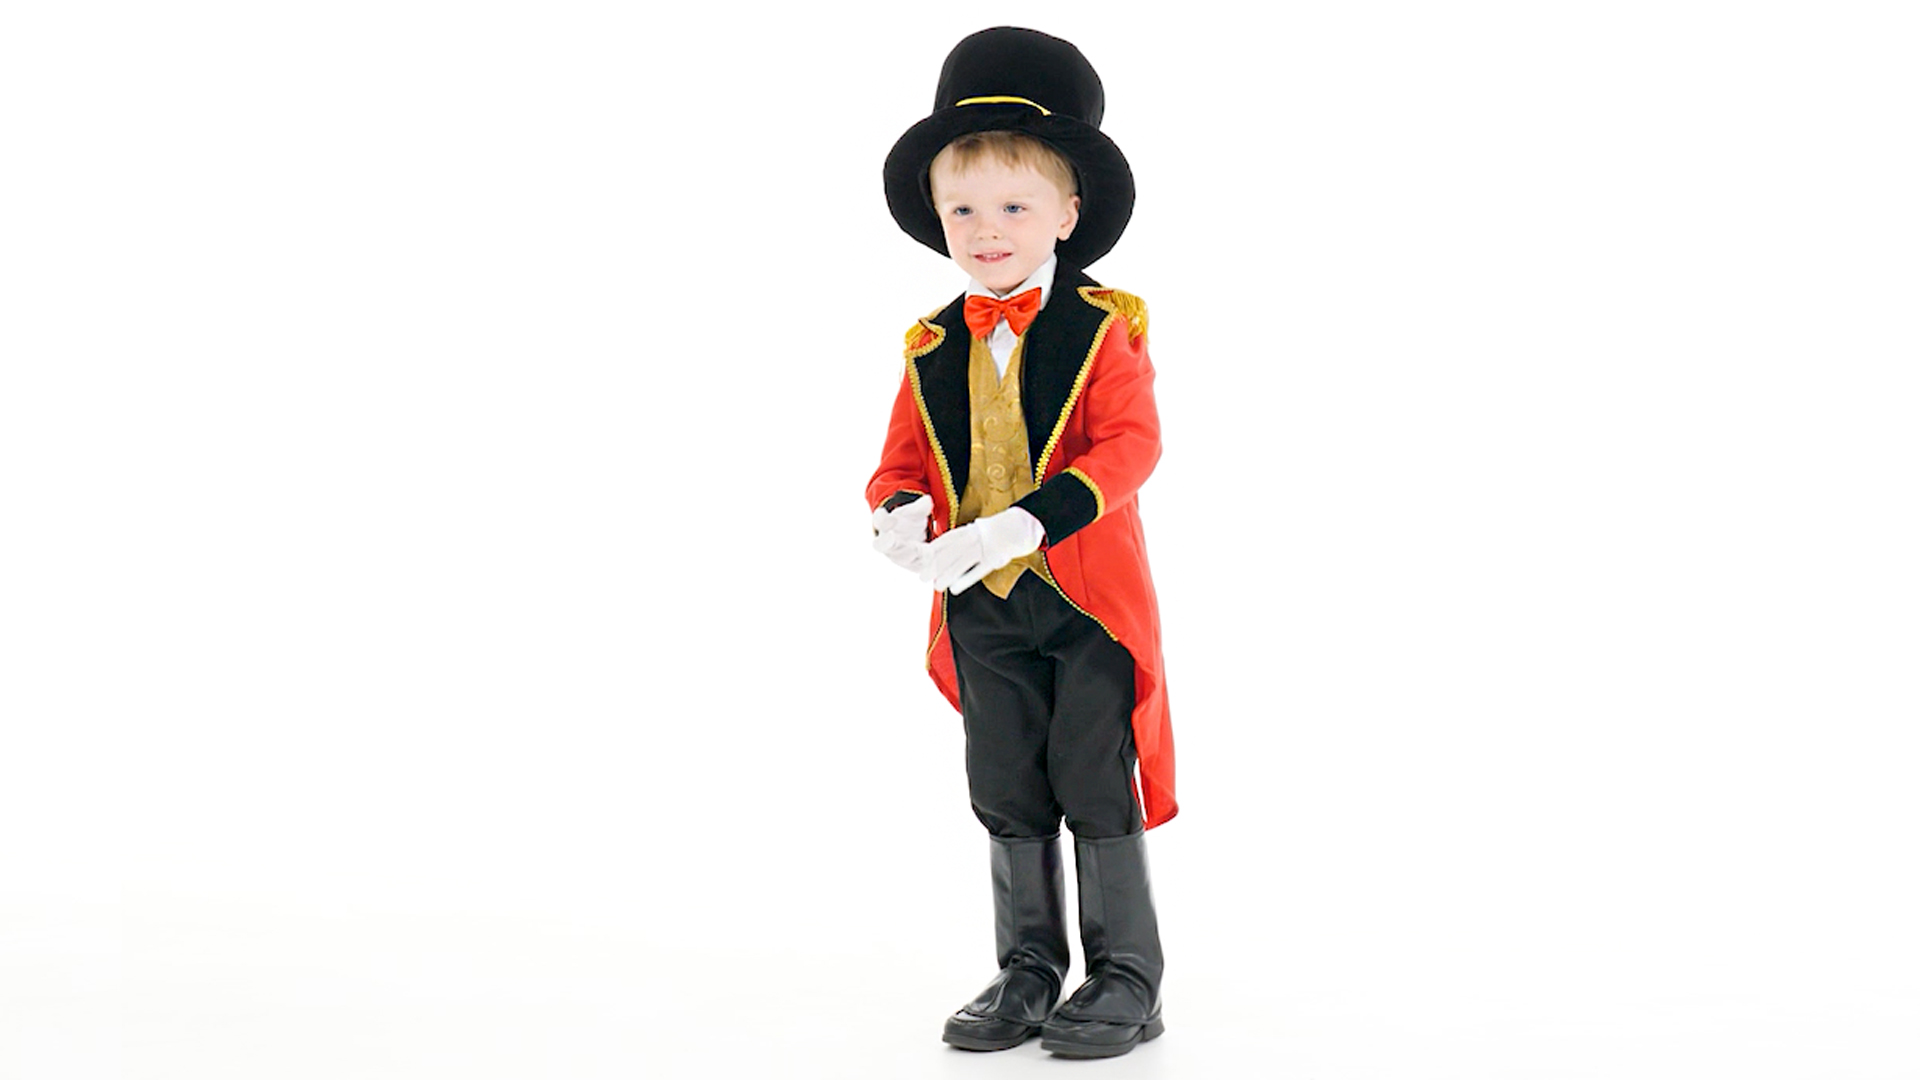 When they wear this Toddler Ringmaster Costume, the circus will probably be the best ever with them at the helm!